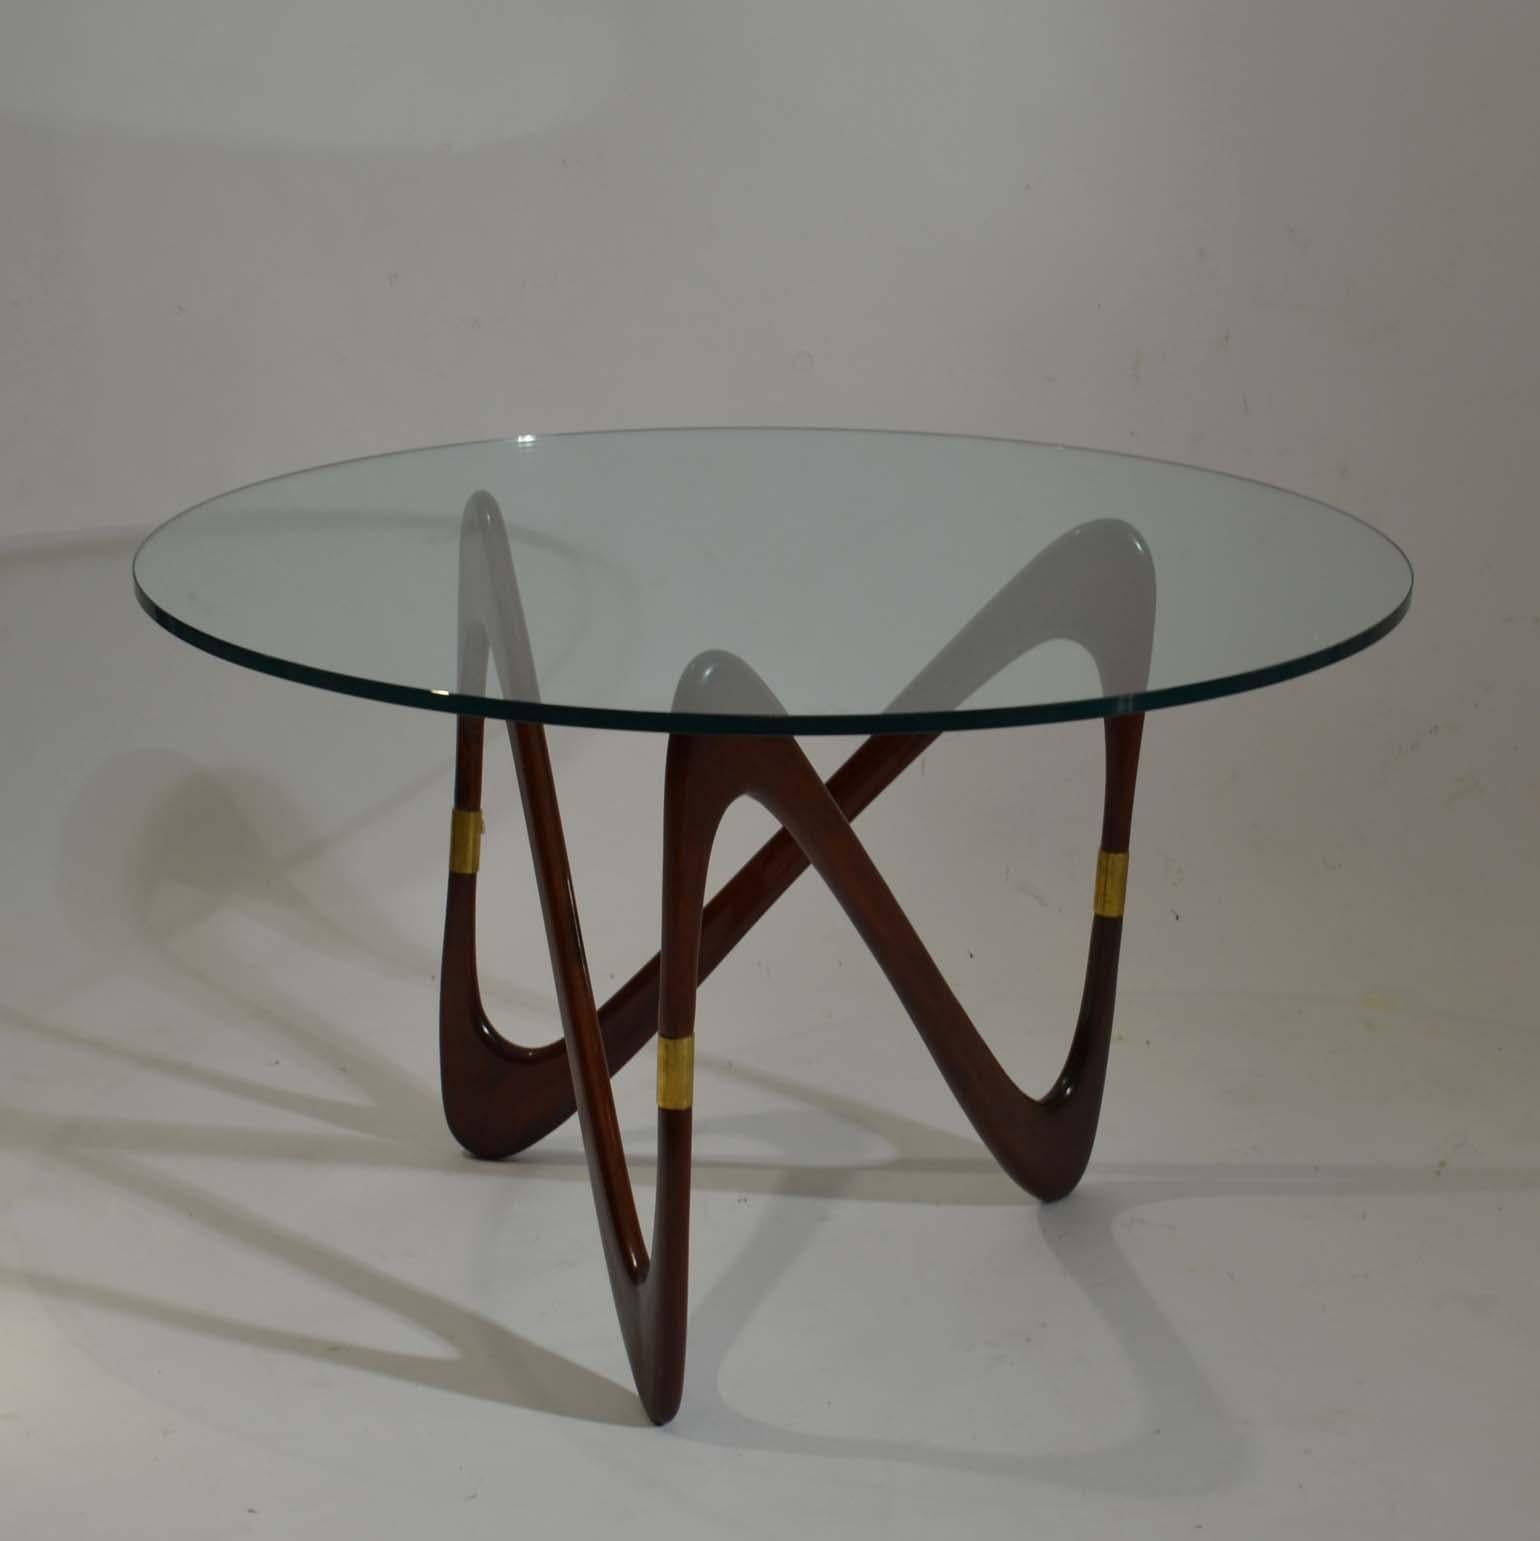 An Italian architect-designer Cesare Lacca created a series of modernist furniture and metalwork throughout the 1950s. This sculptural coffee table has an elegant flow of mahogany wood S-shape legs connected into a continual loop joined by three